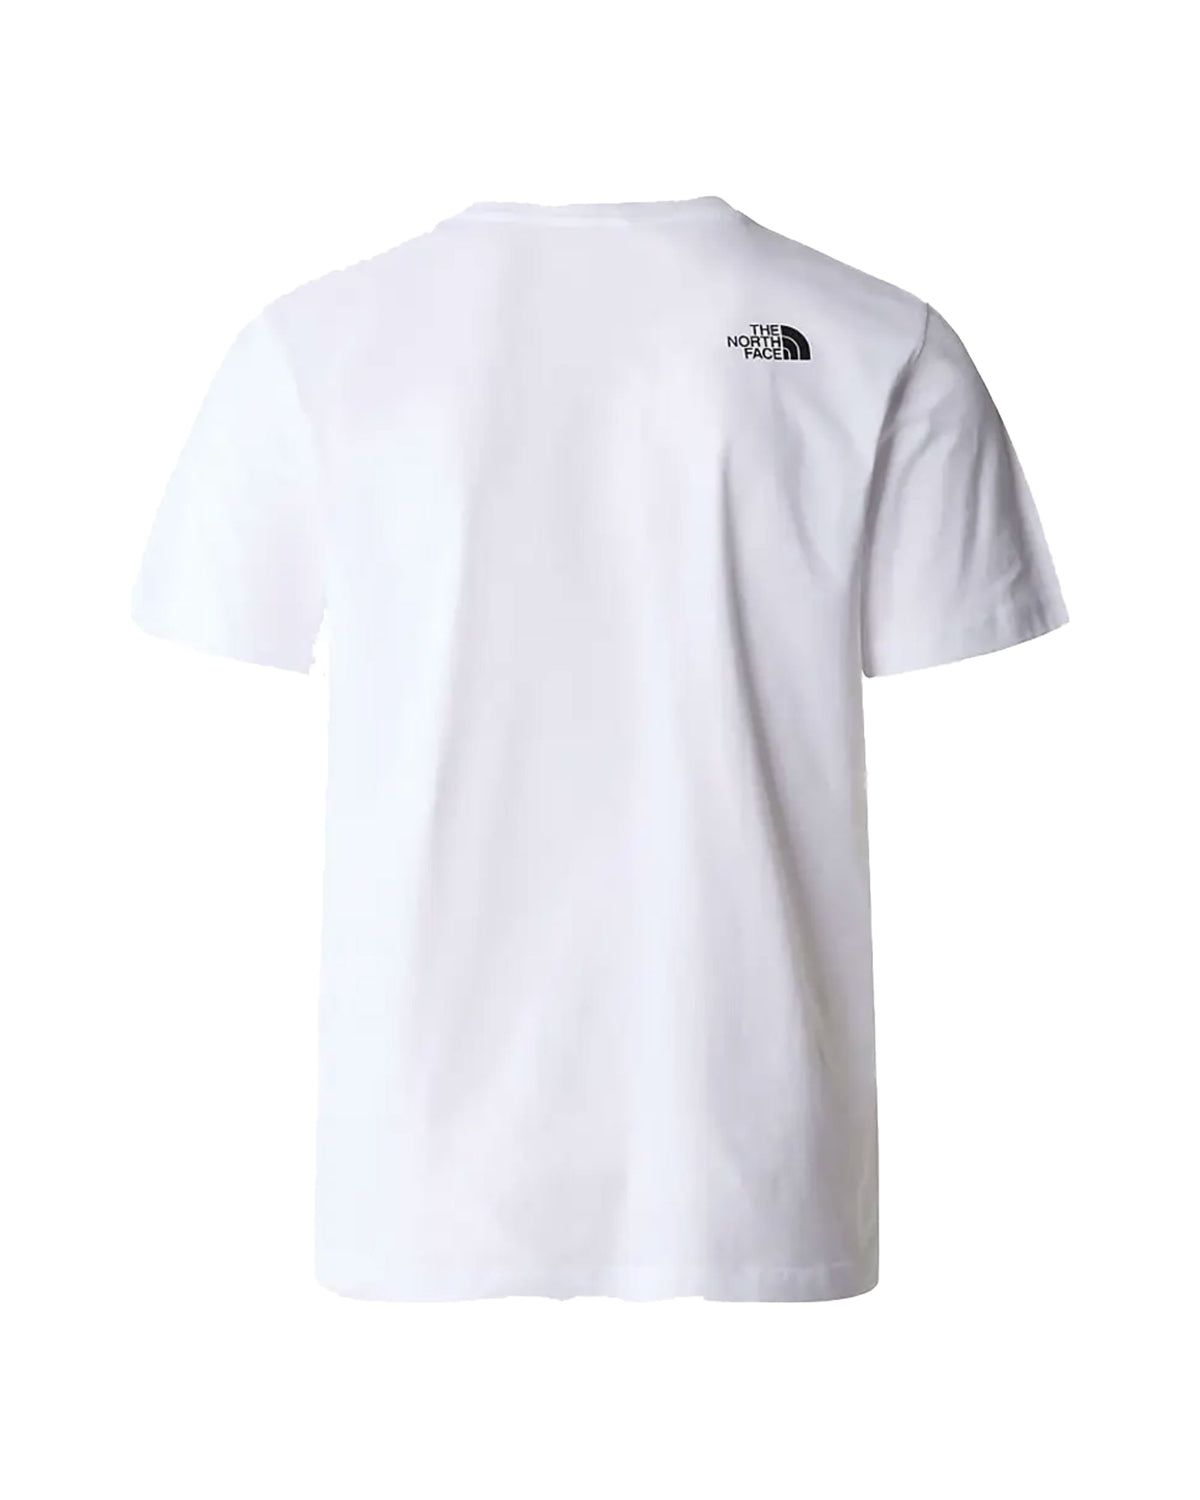 T-Shirt Uomo The North Face Easy Bianco